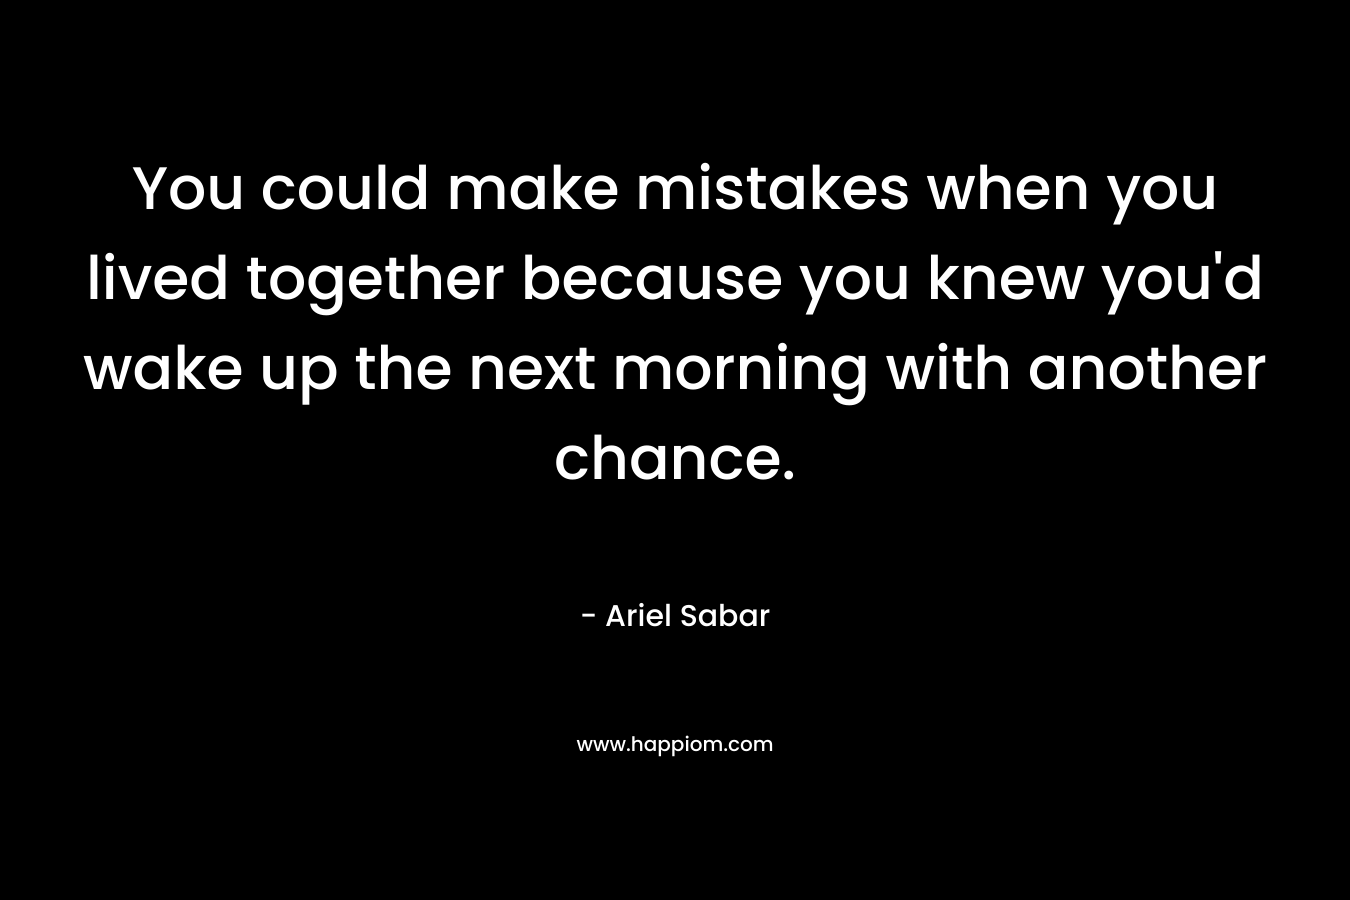 You could make mistakes when you lived together because you knew you'd wake up the next morning with another chance.